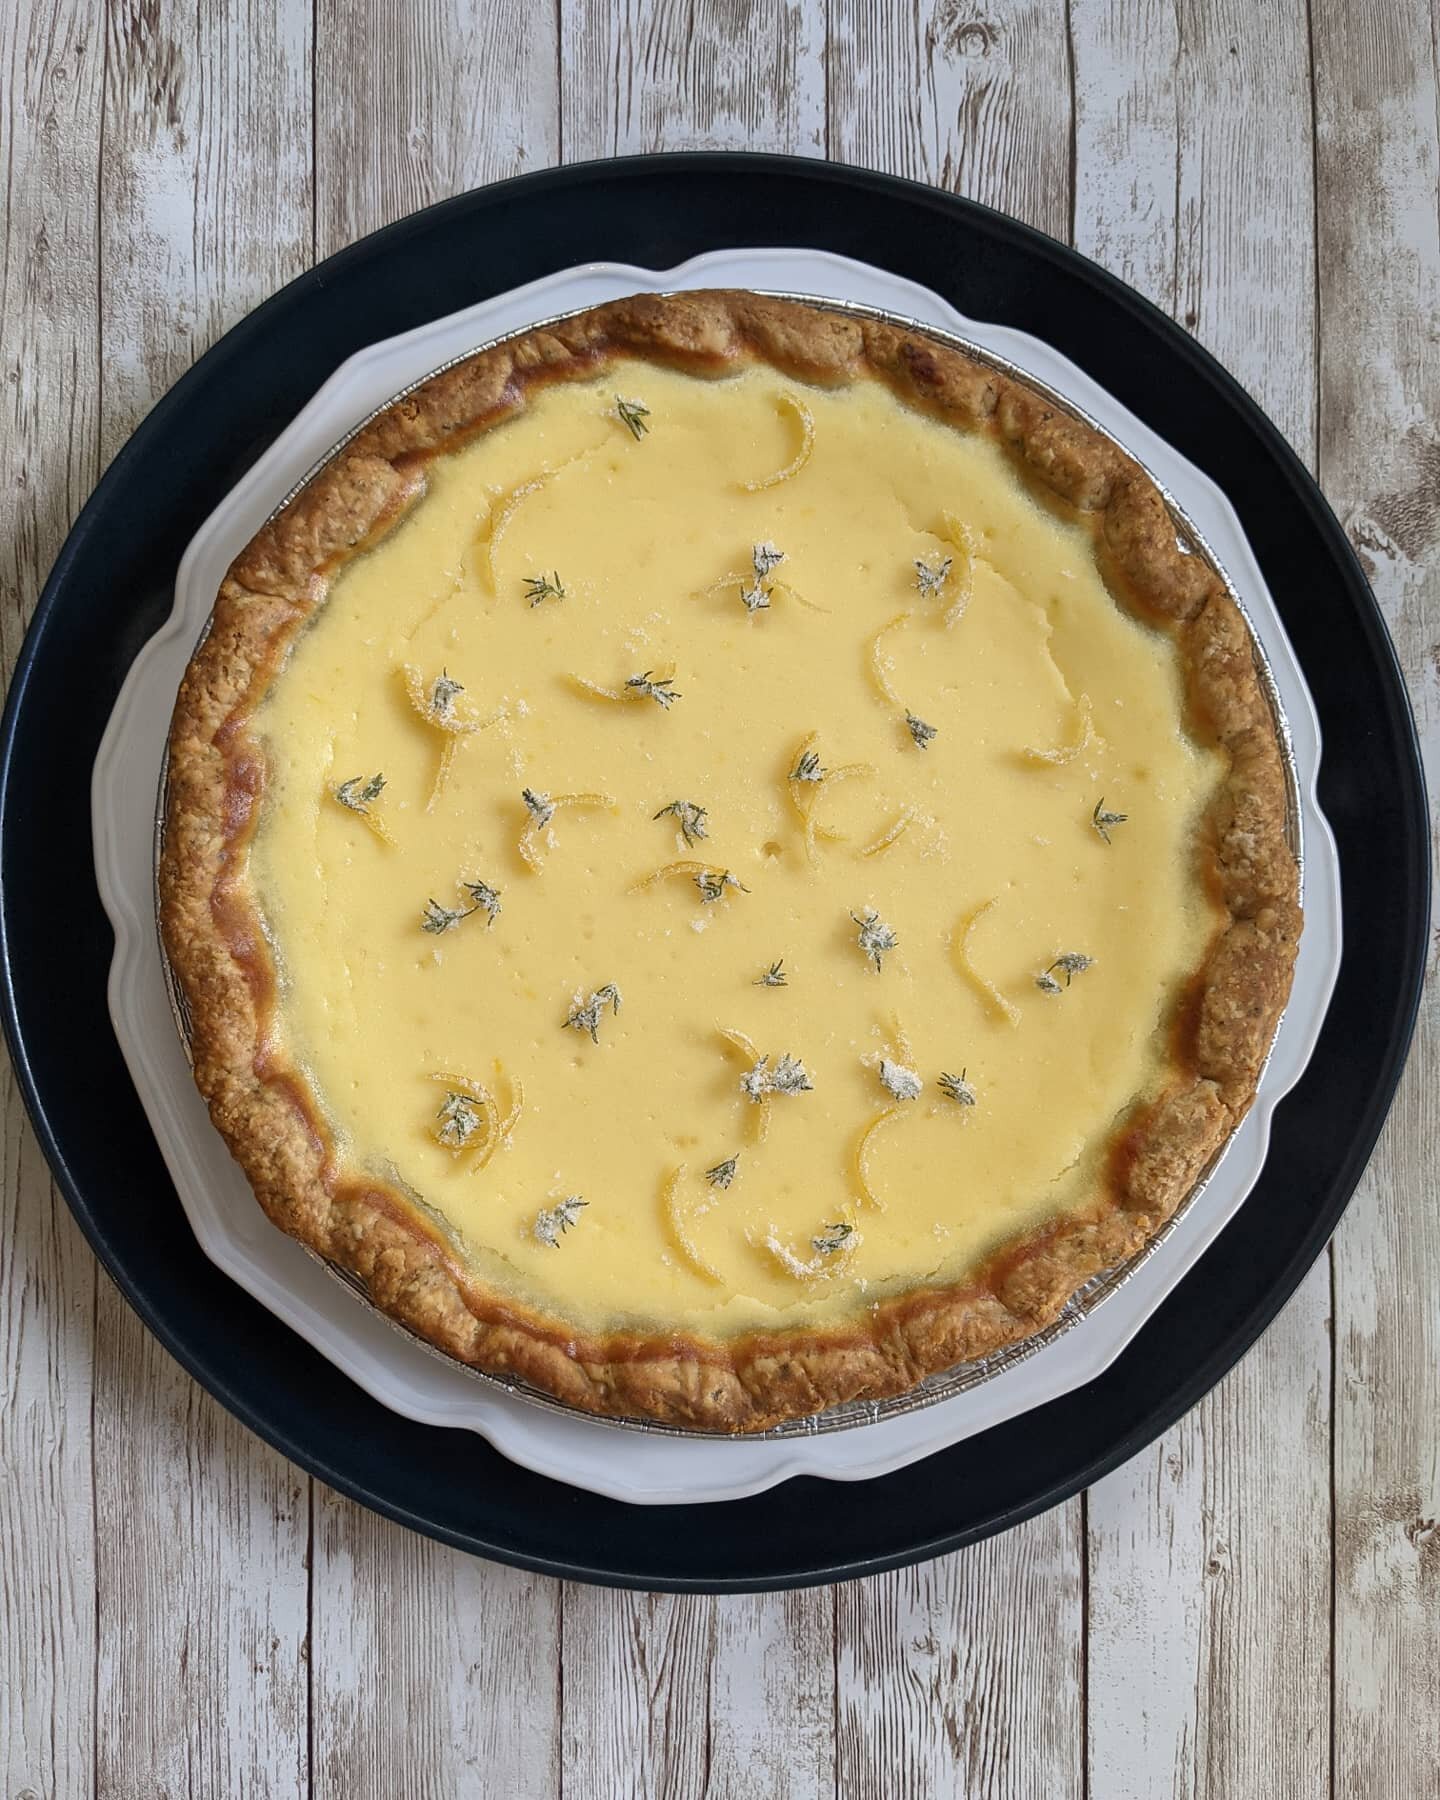 Ricotta Lemon-Thyme
:
The ricotta gives it a cheesecake texture with lovely notes of herbs and lemon. 
:
Made to Order
$30 (Whole)
:
#thepiewitch #pies #piesofinstagram #lemon #herbcrust #thyme #ricotta #ricottacheese #cheesecake